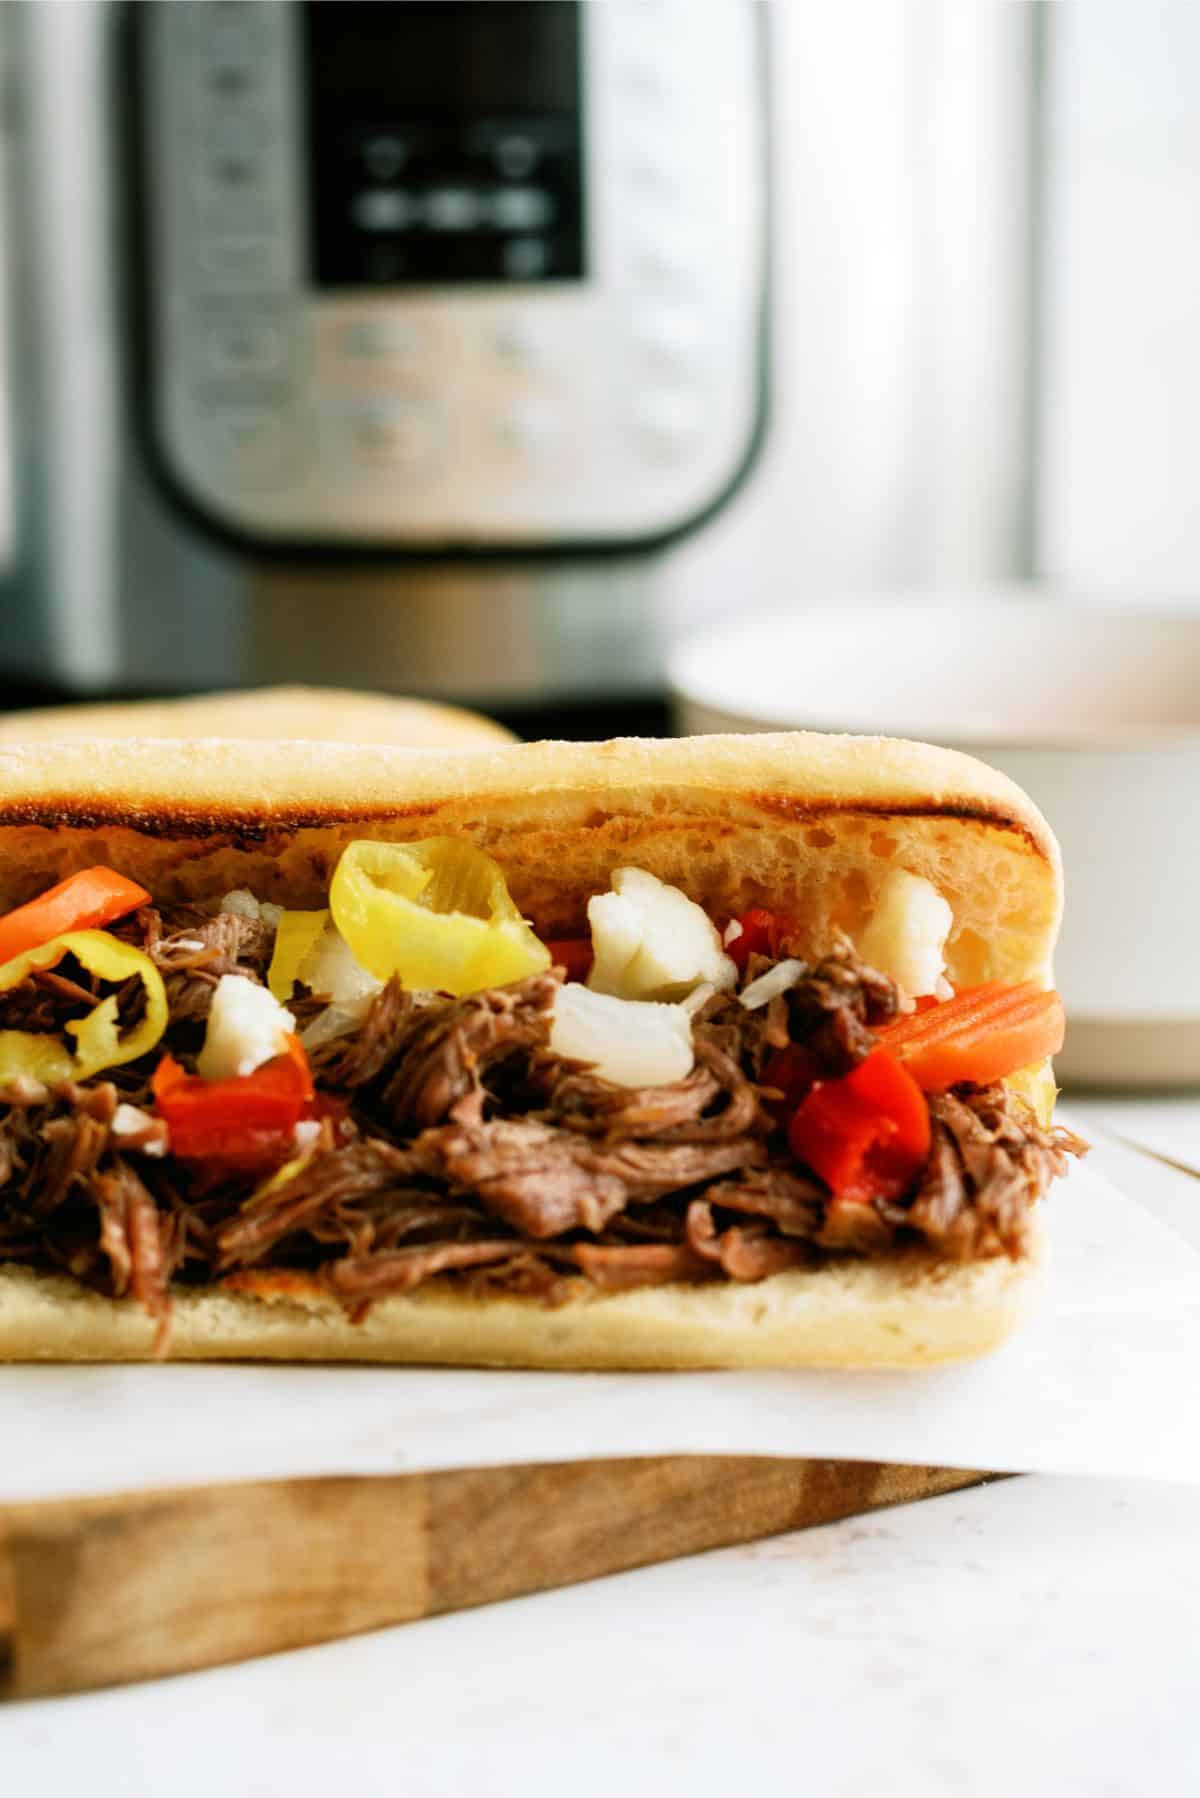 https://www.sixsistersstuff.com/wp-content/uploads/2023/01/Instant-Pot-Chicago-Style-Italian-Beef-Sandwiches-1.jpg